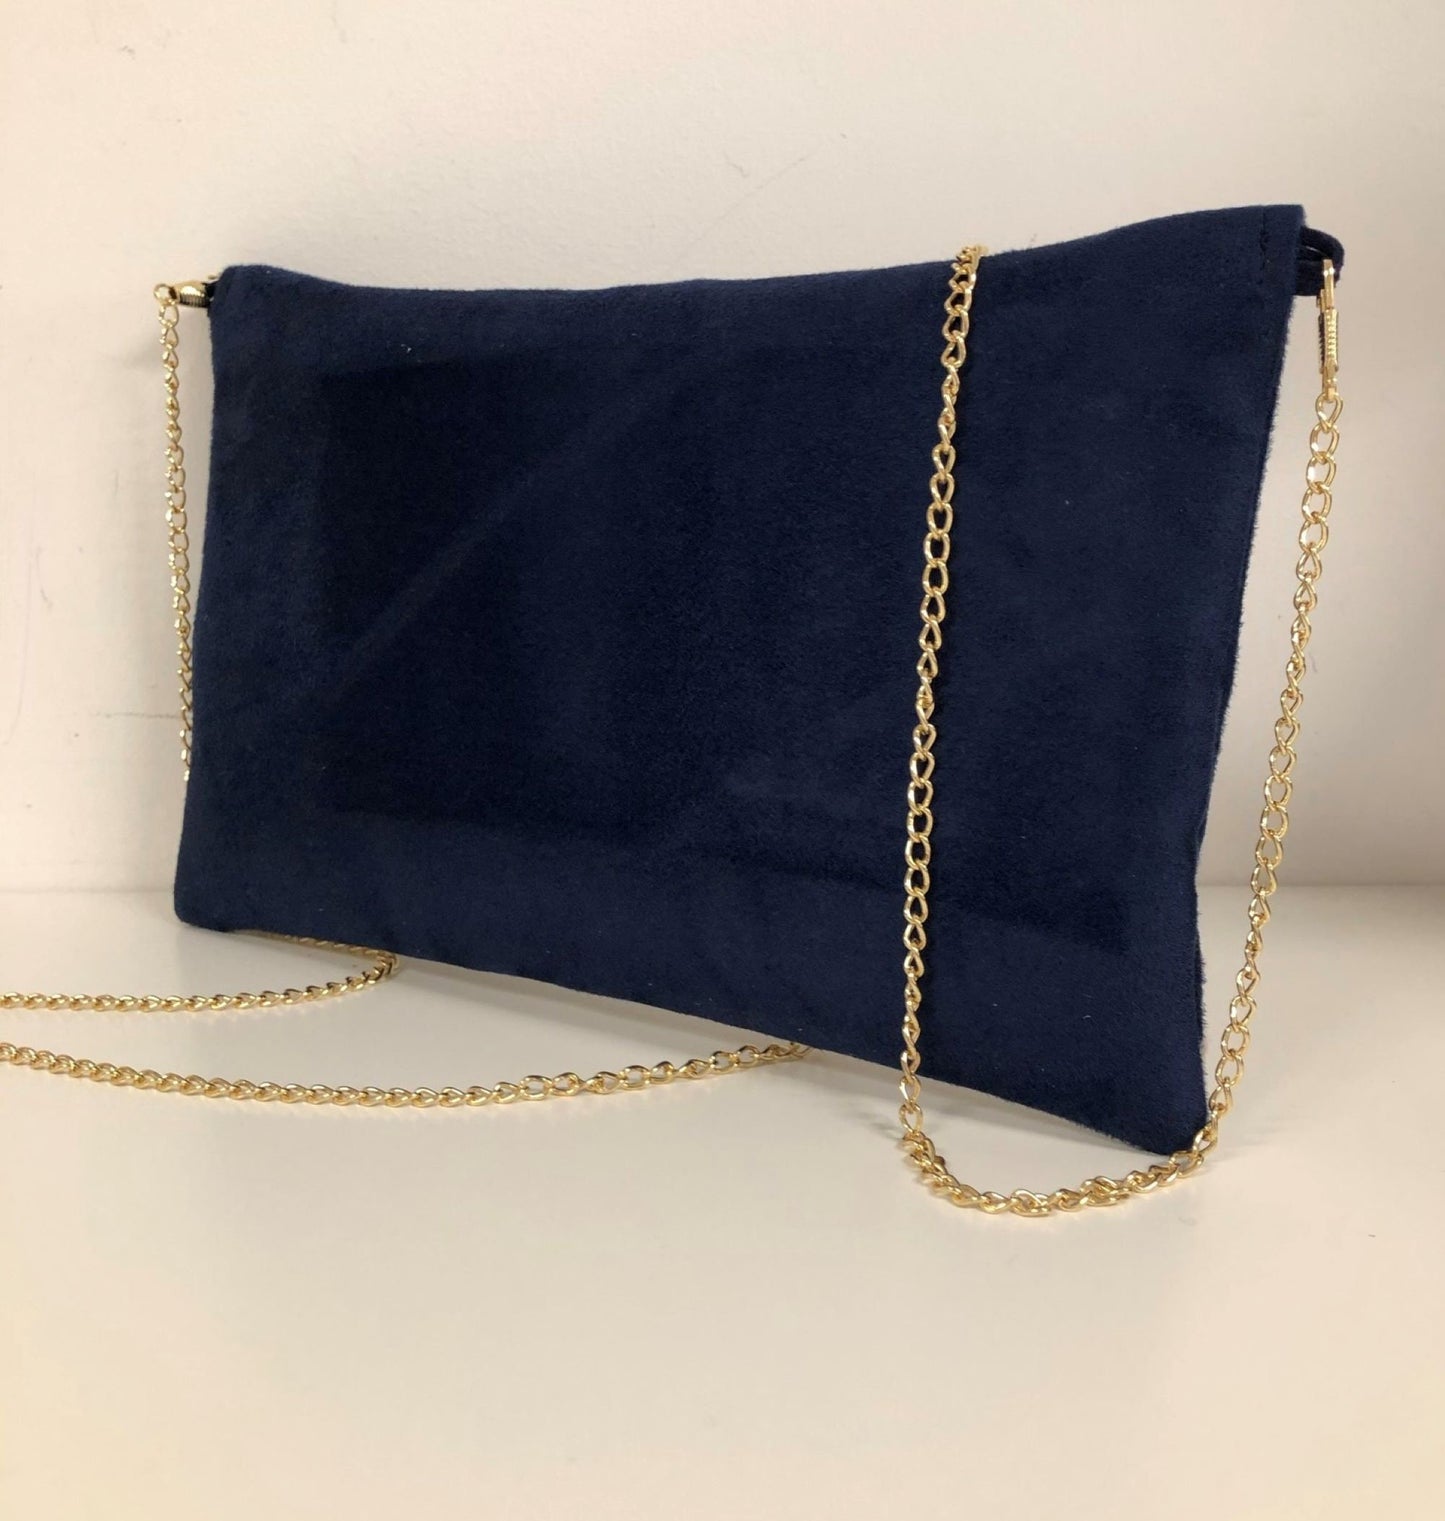 Isa clutch bag in navy blue and ecru with gold sequins